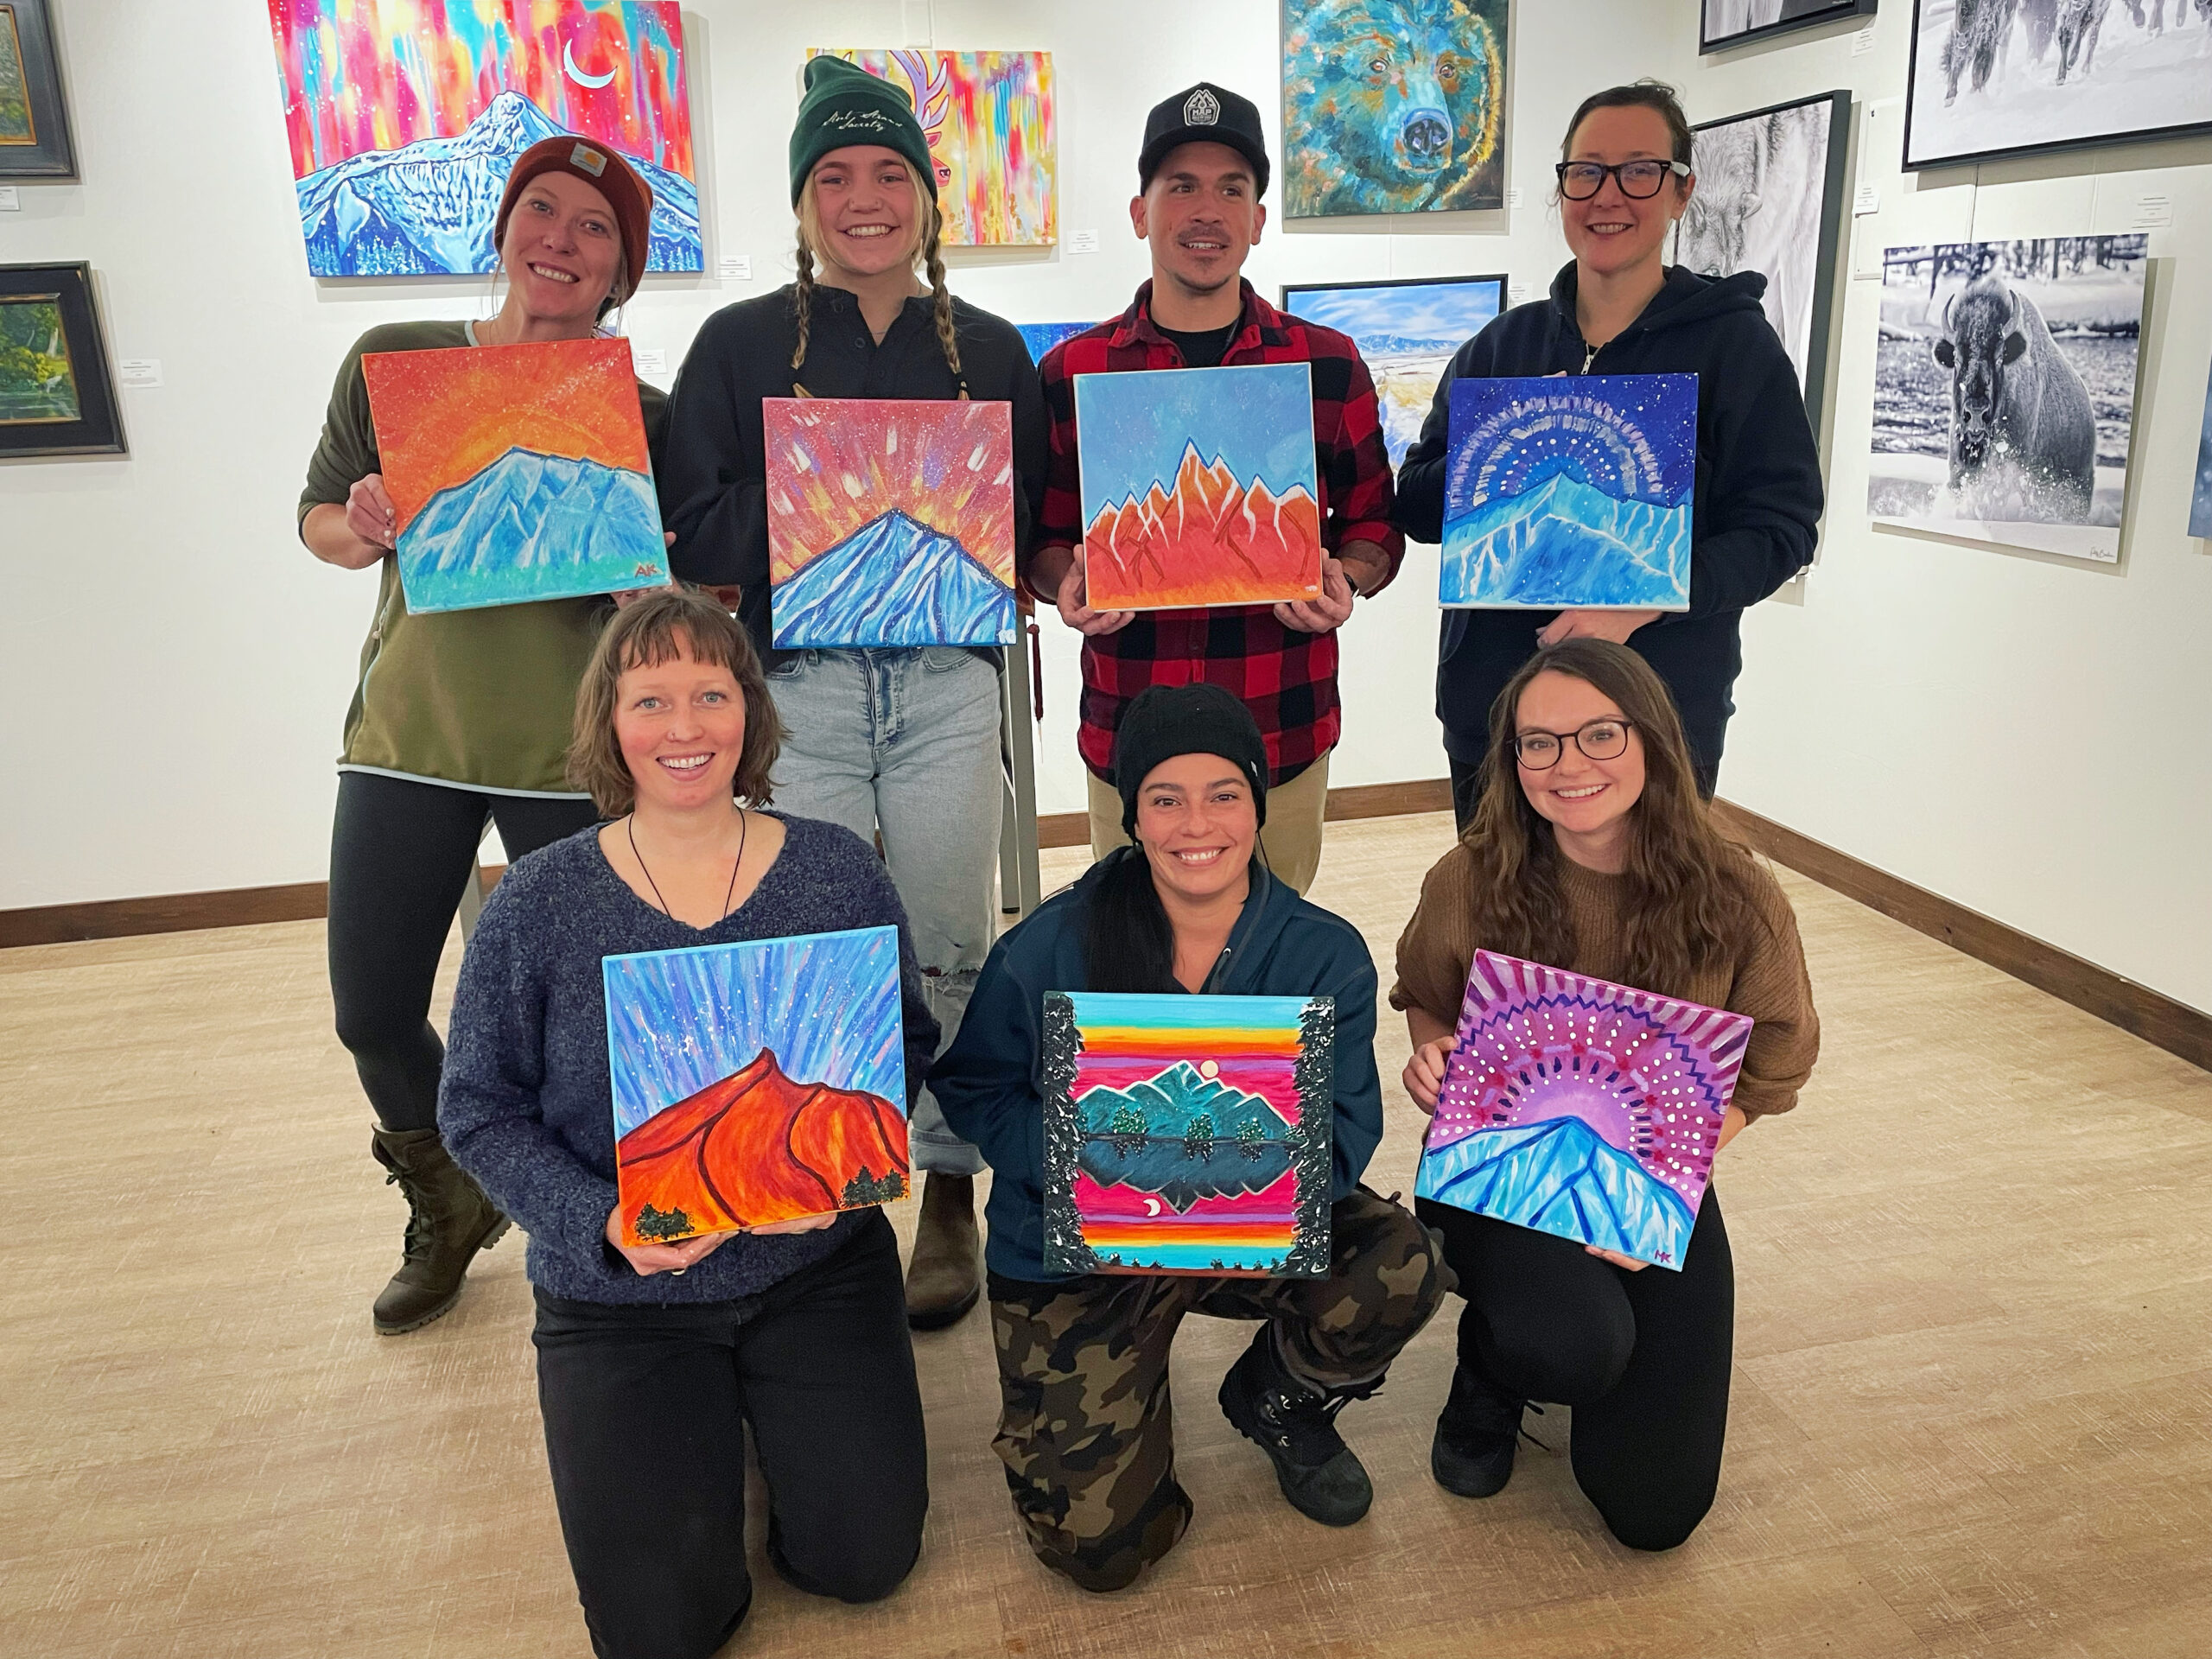 Participants holding their artwork